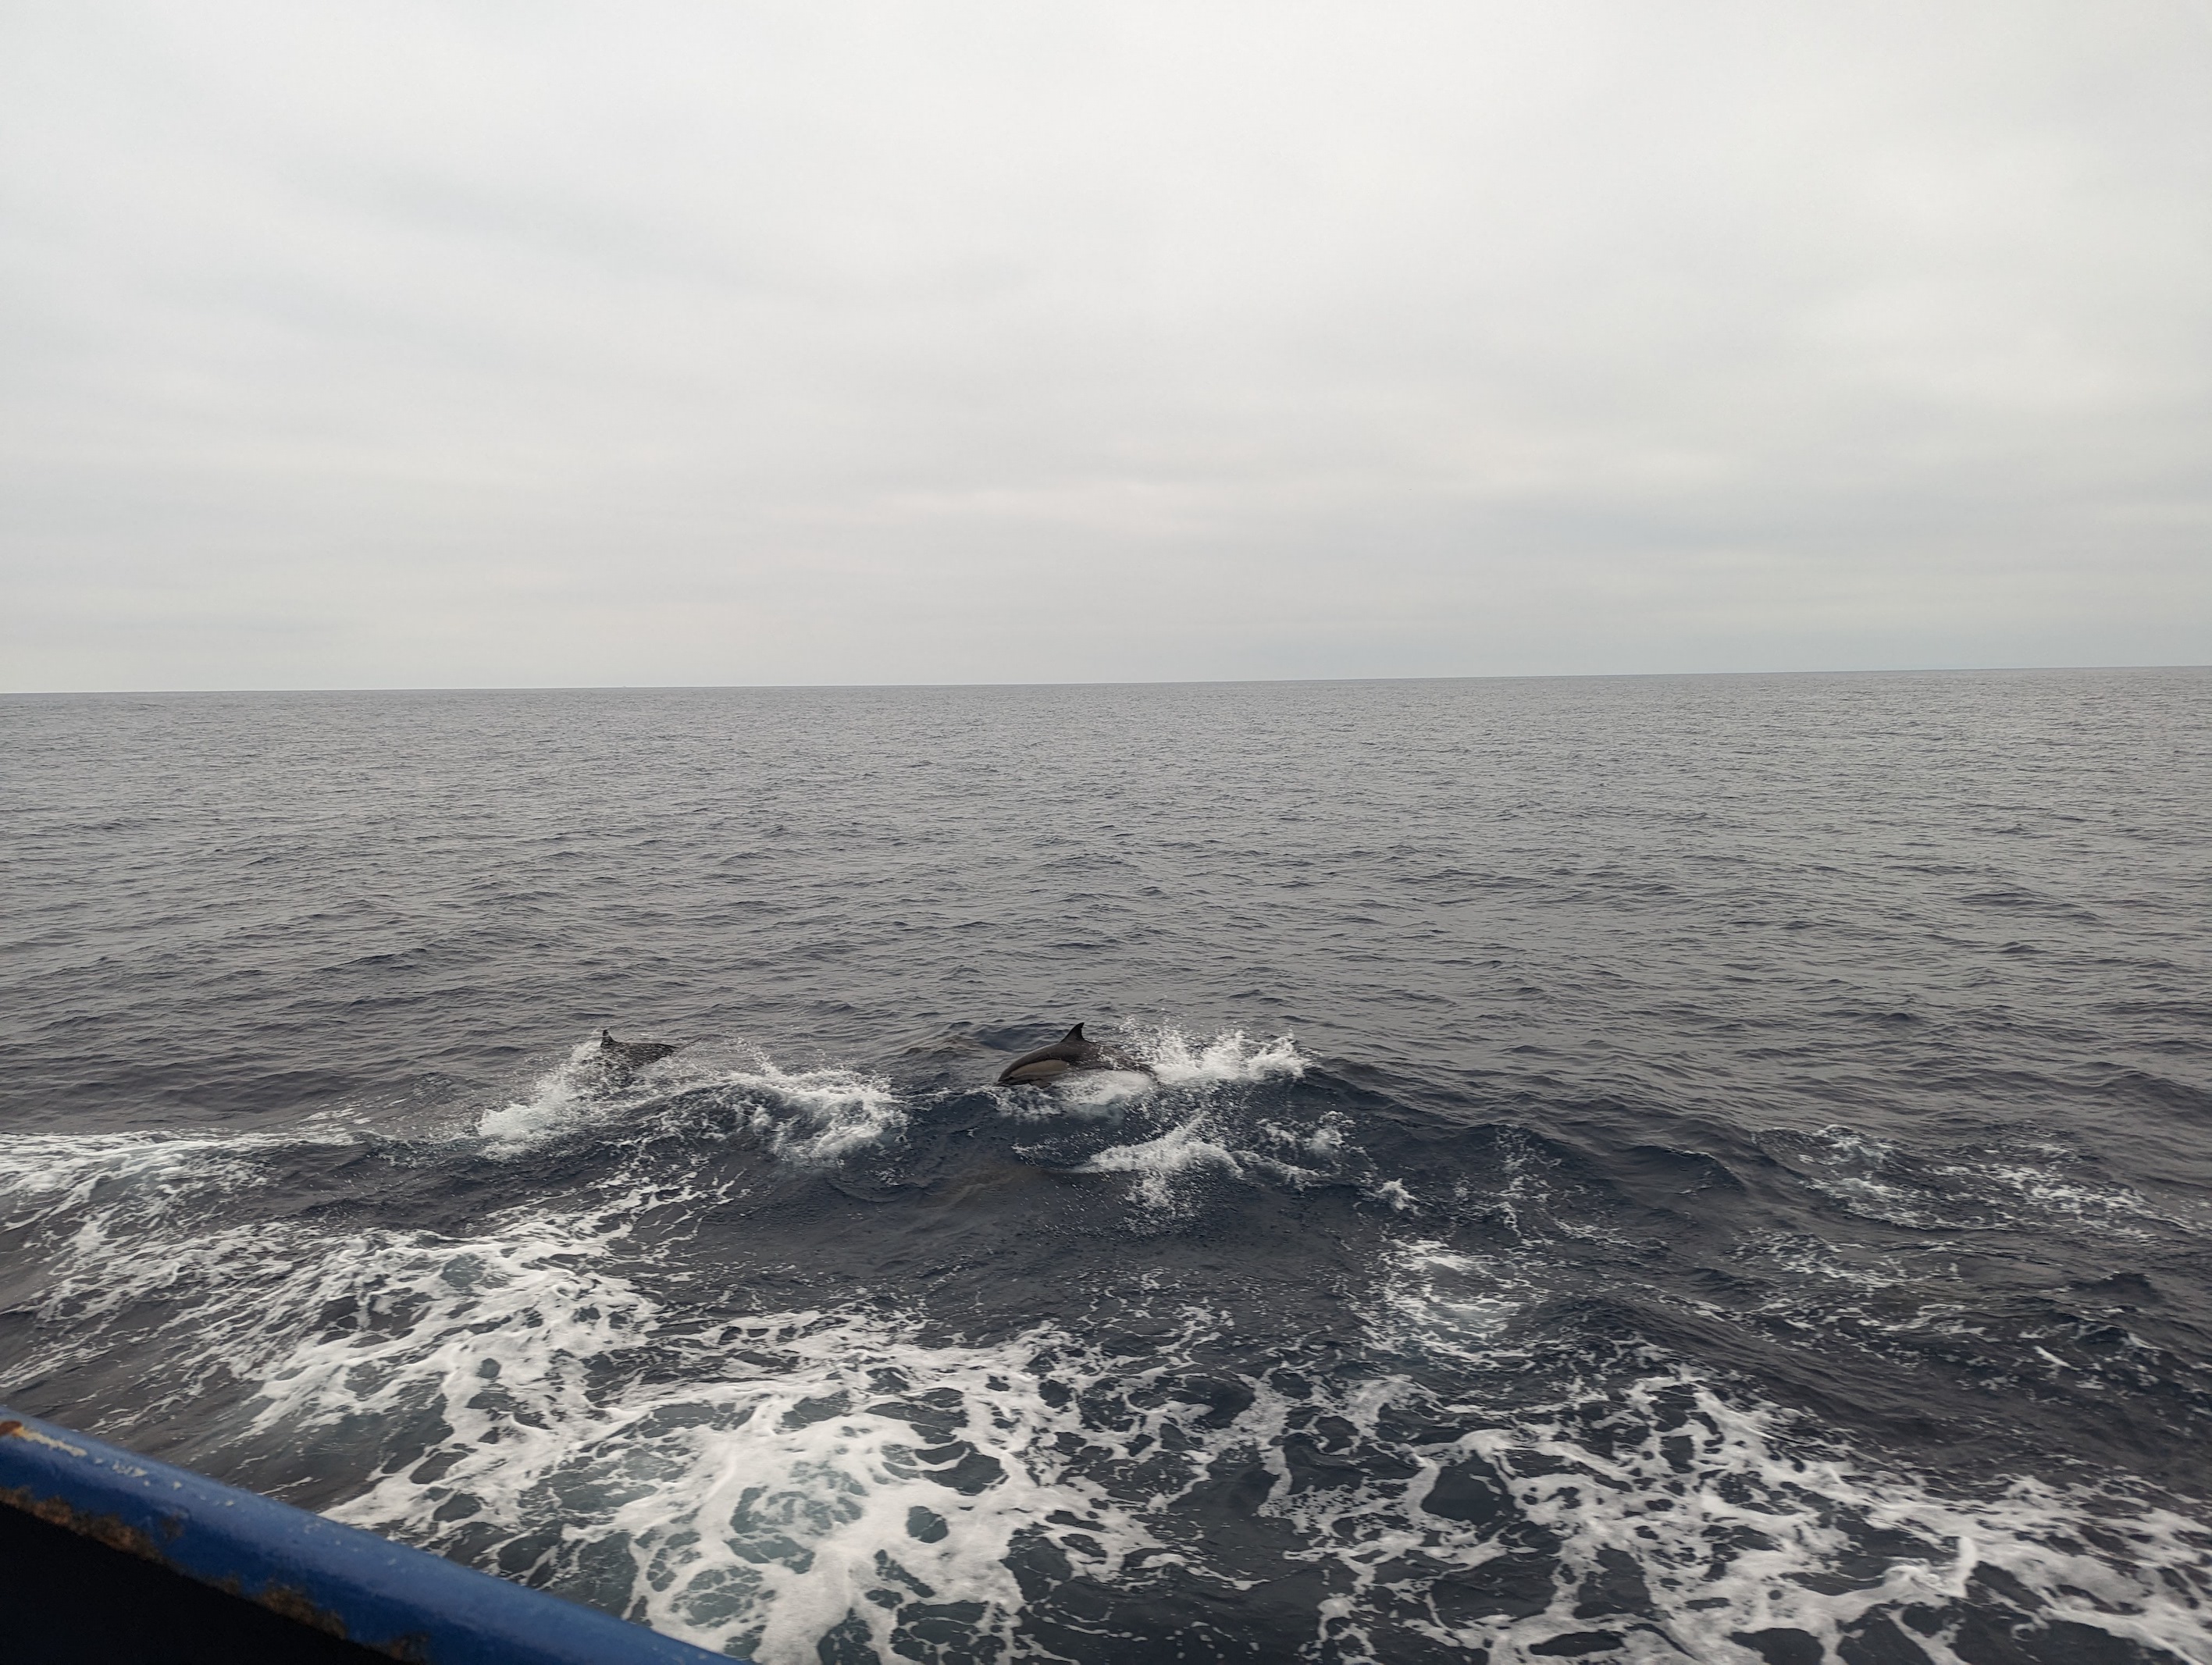 dolphins playing in the ship's wake